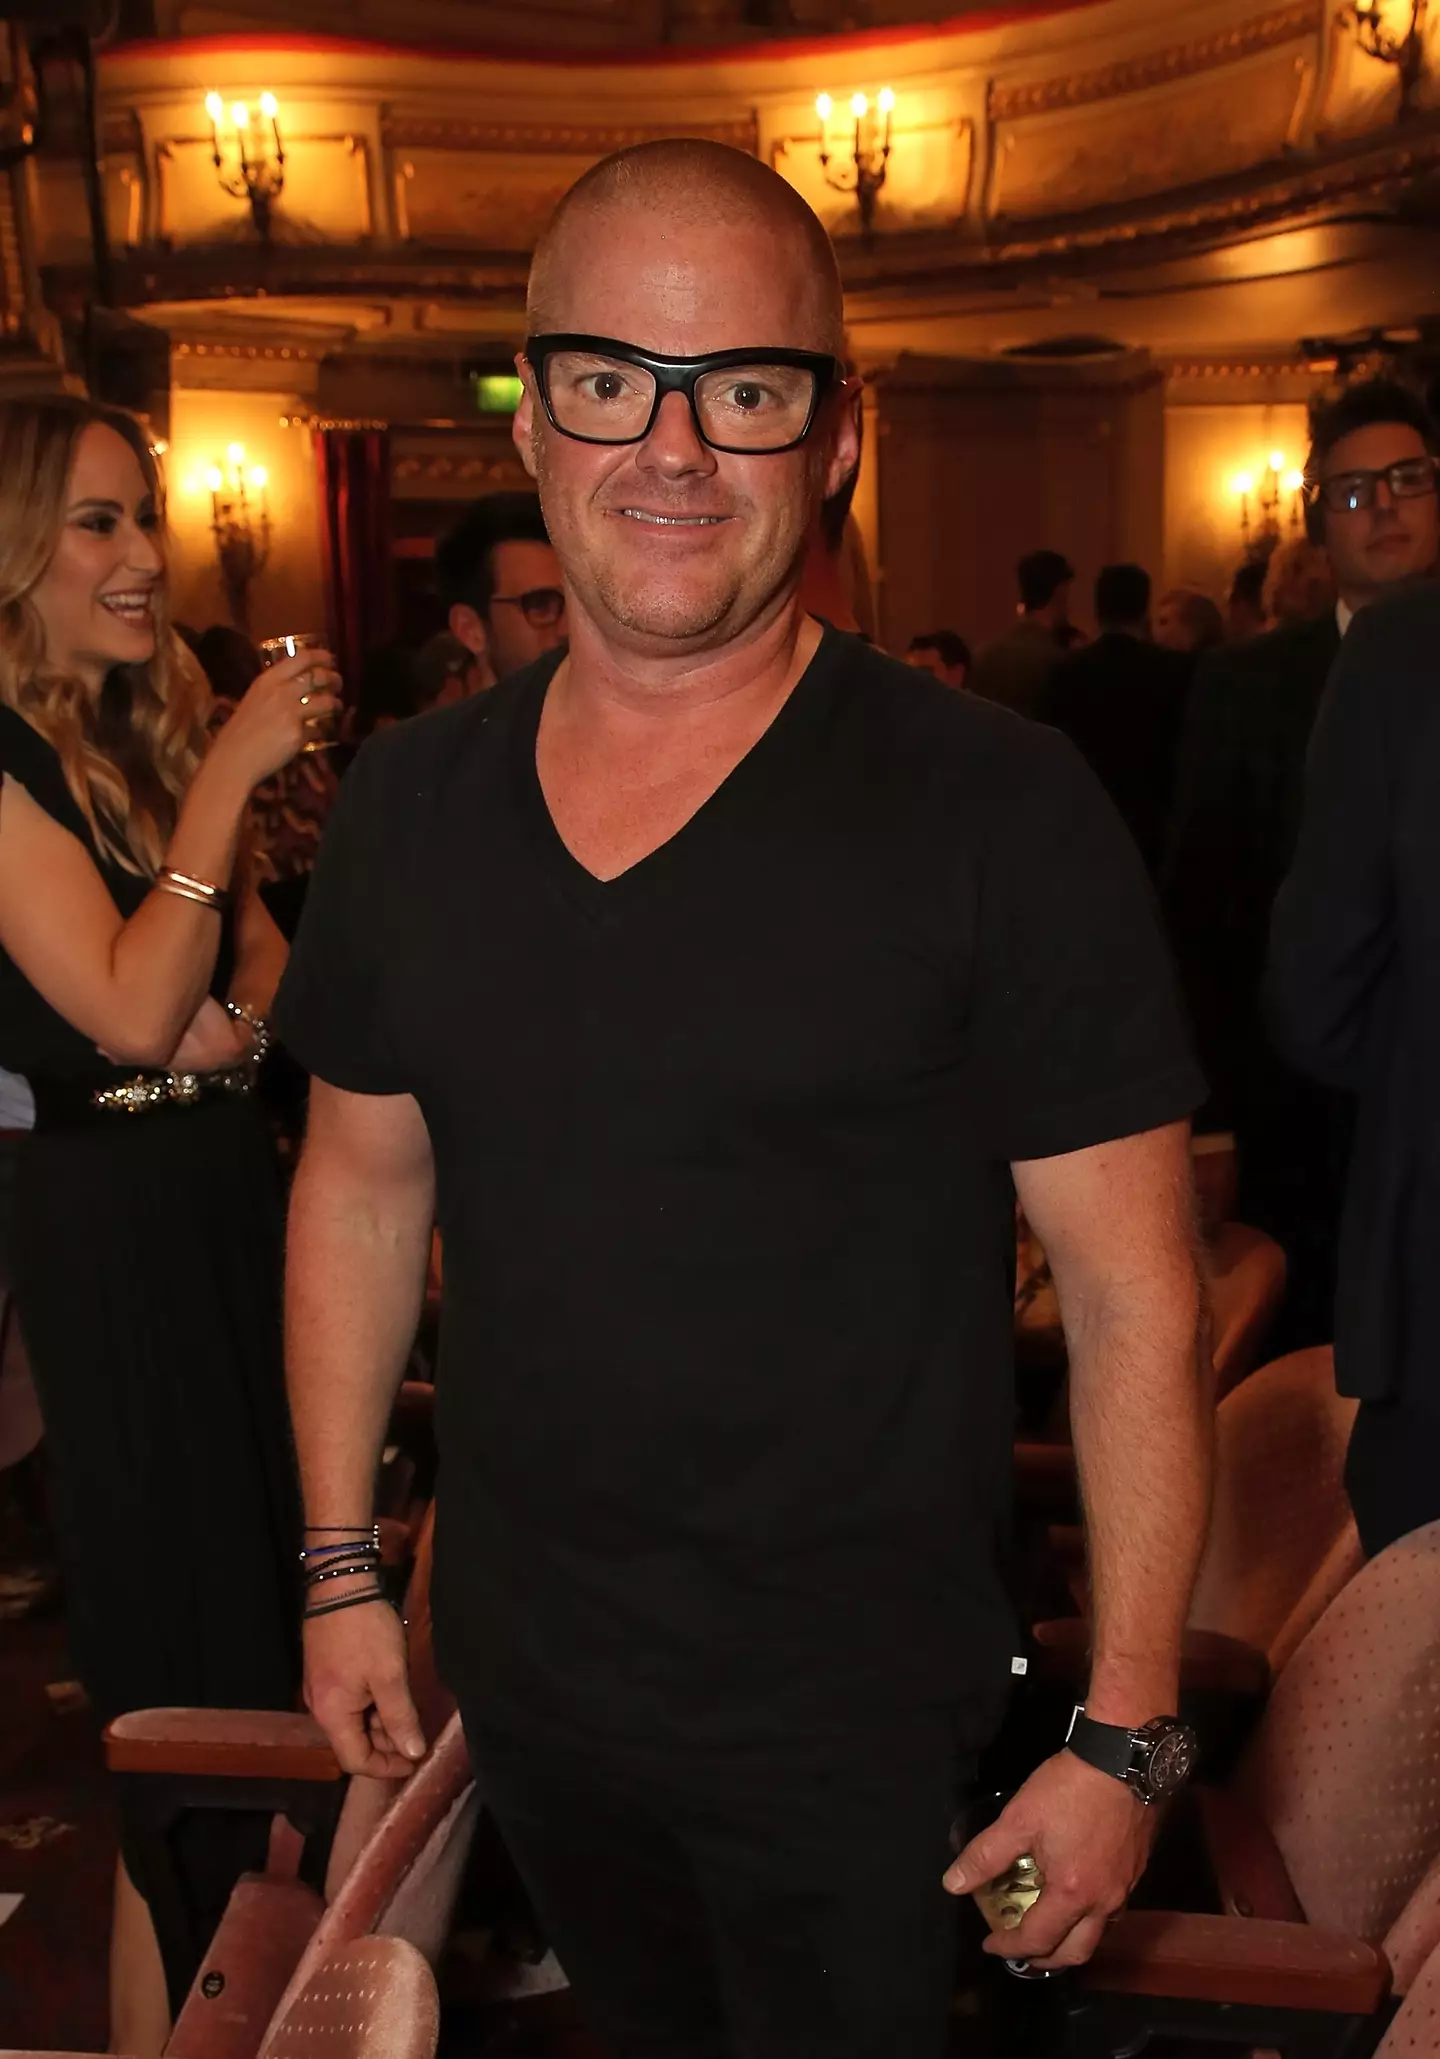 Heston Blumenthal is known for his unique creations with ‘multi-sensory cooking’ and different pairings.